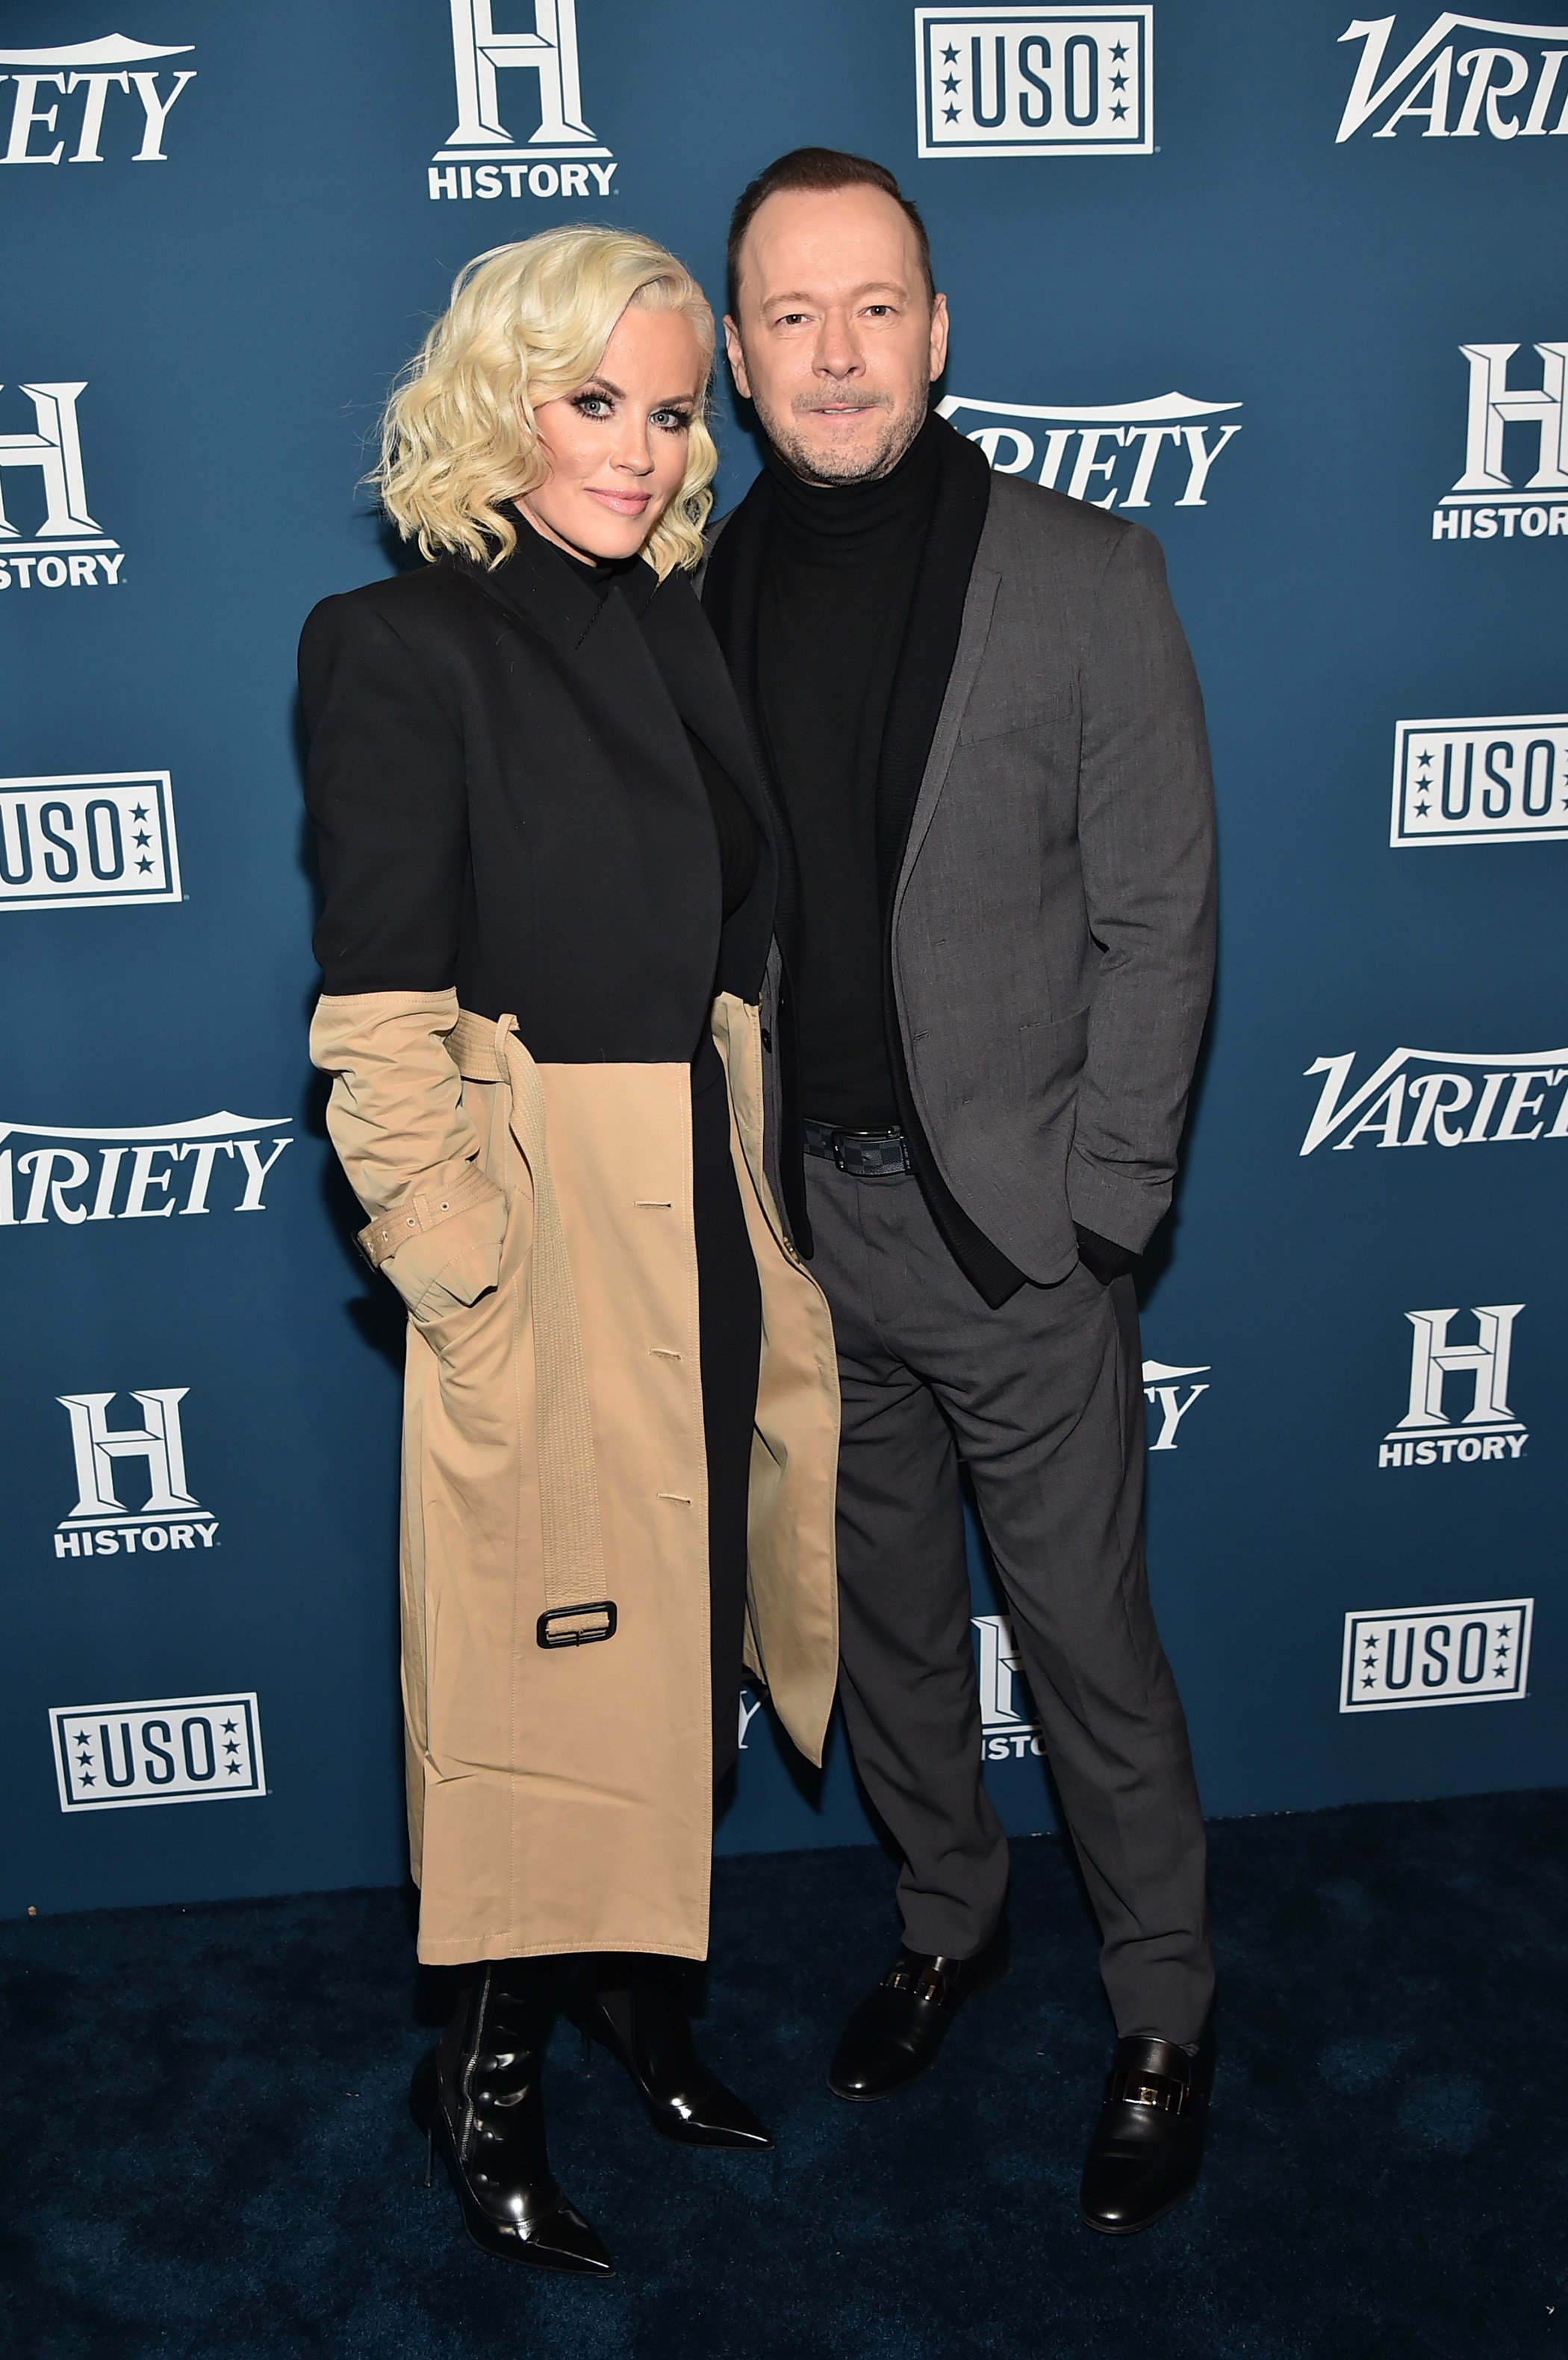 Jenny McCarthy and Donnie Wahlberg attend Variety's 3rd Annual Salute To Service at Cipriani 25 Broadway on November 06, 2019 in New York City. | Source: Getty Images